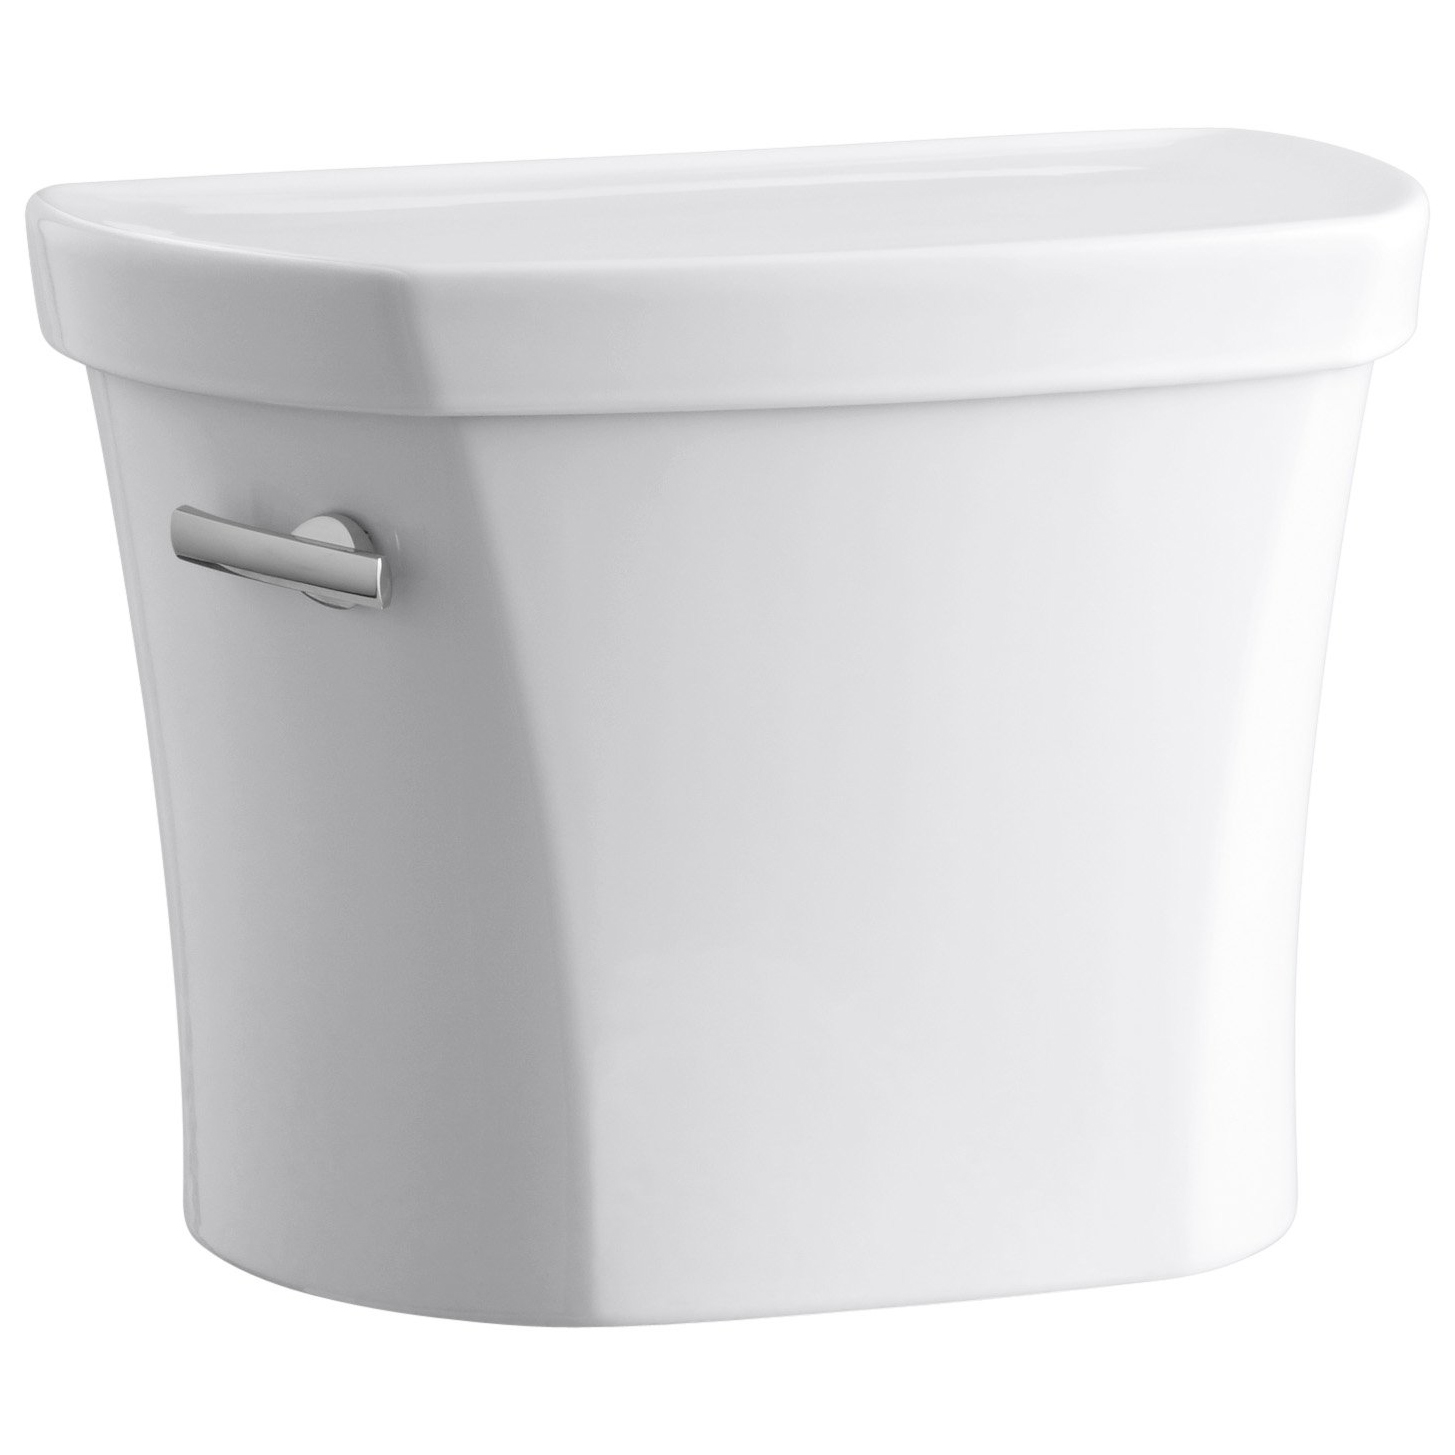 Wellworth 1.28 gpf Toilet Tank w/14" Rough-In/Liner in White